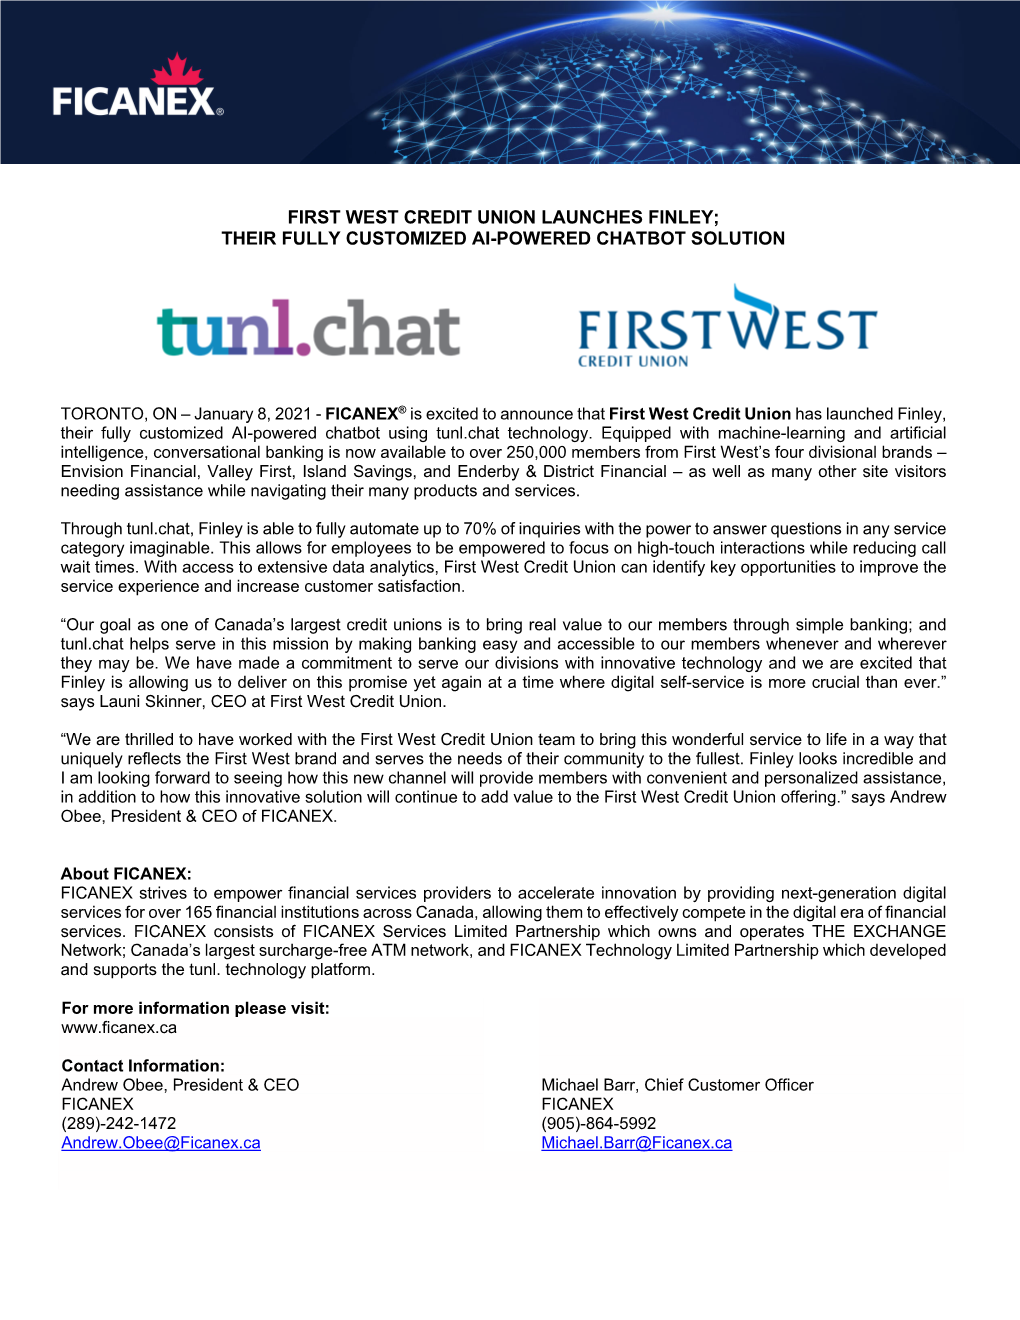 First West Credit Union Launches Finley; Their Fully Customized Ai-Powered Chatbot Solution